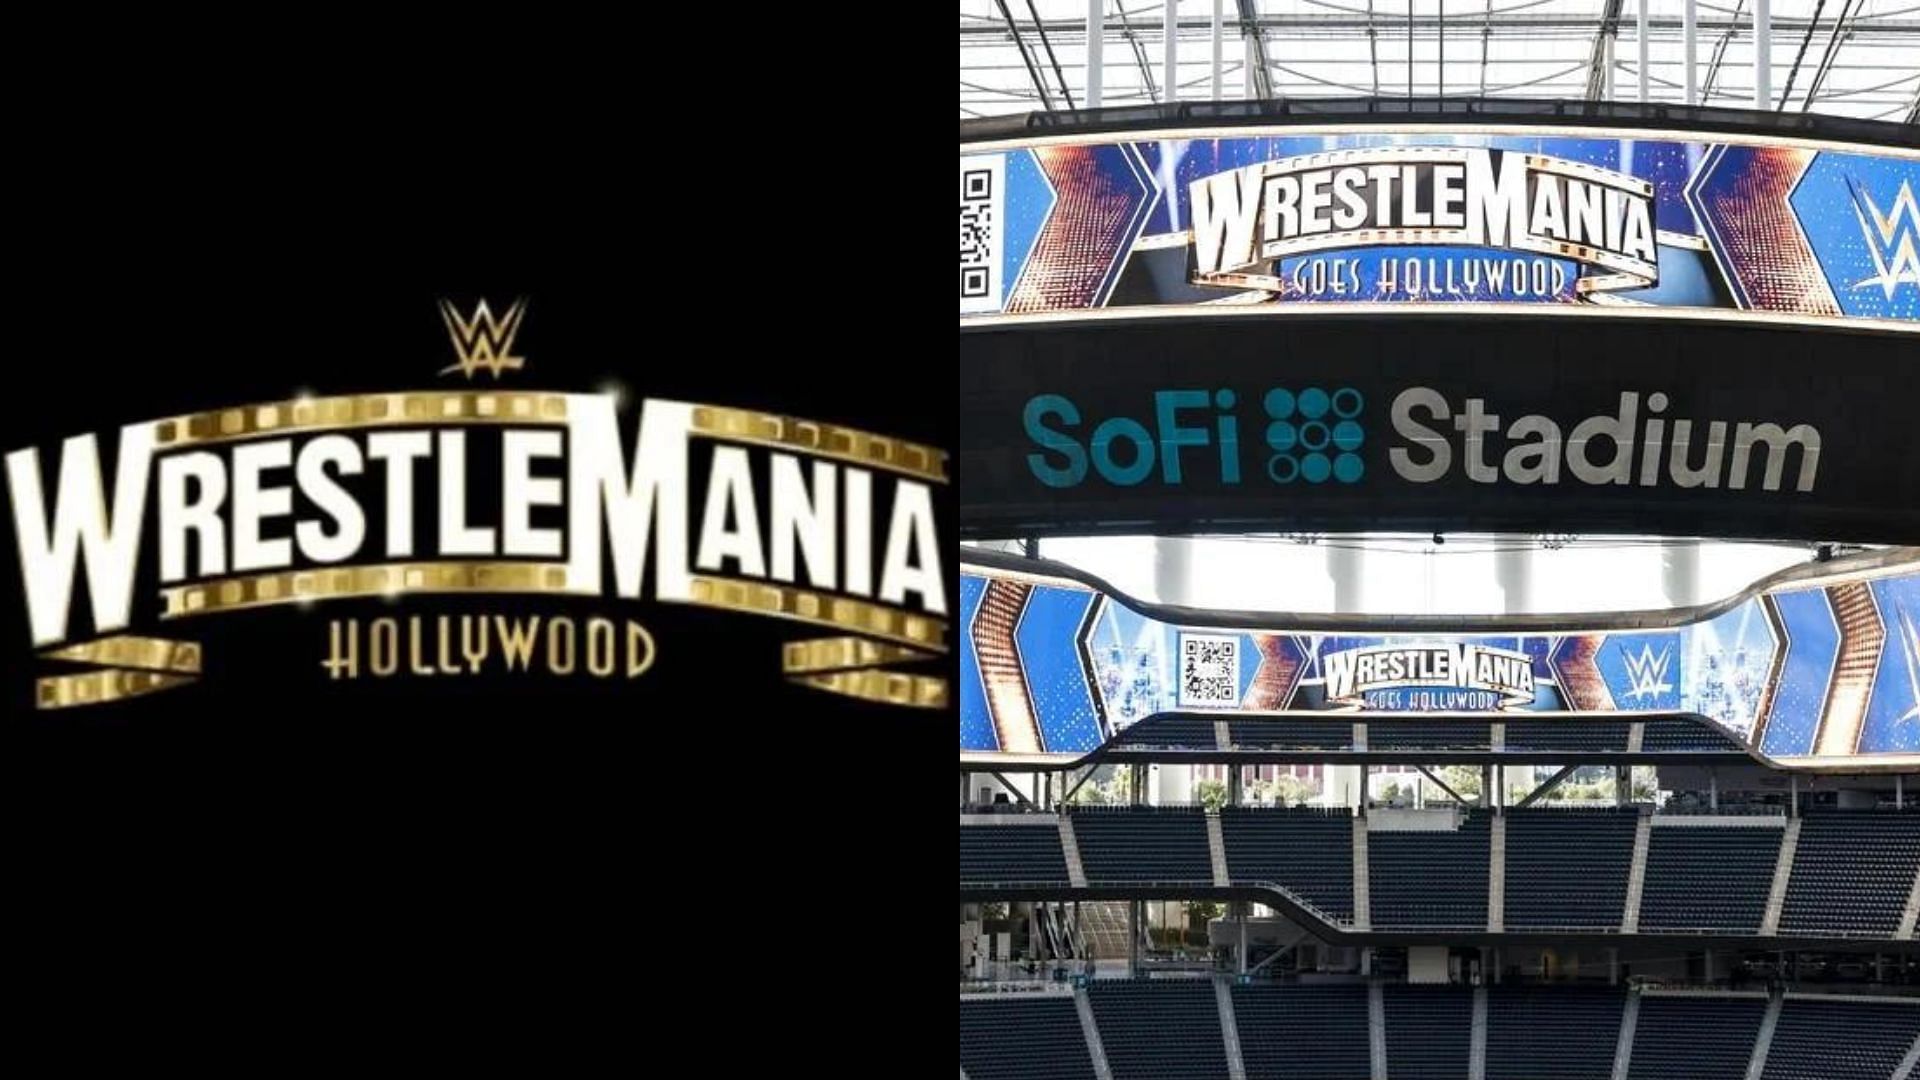 WWE WrestleMania 39 will take place this weekend in Los Angeles.